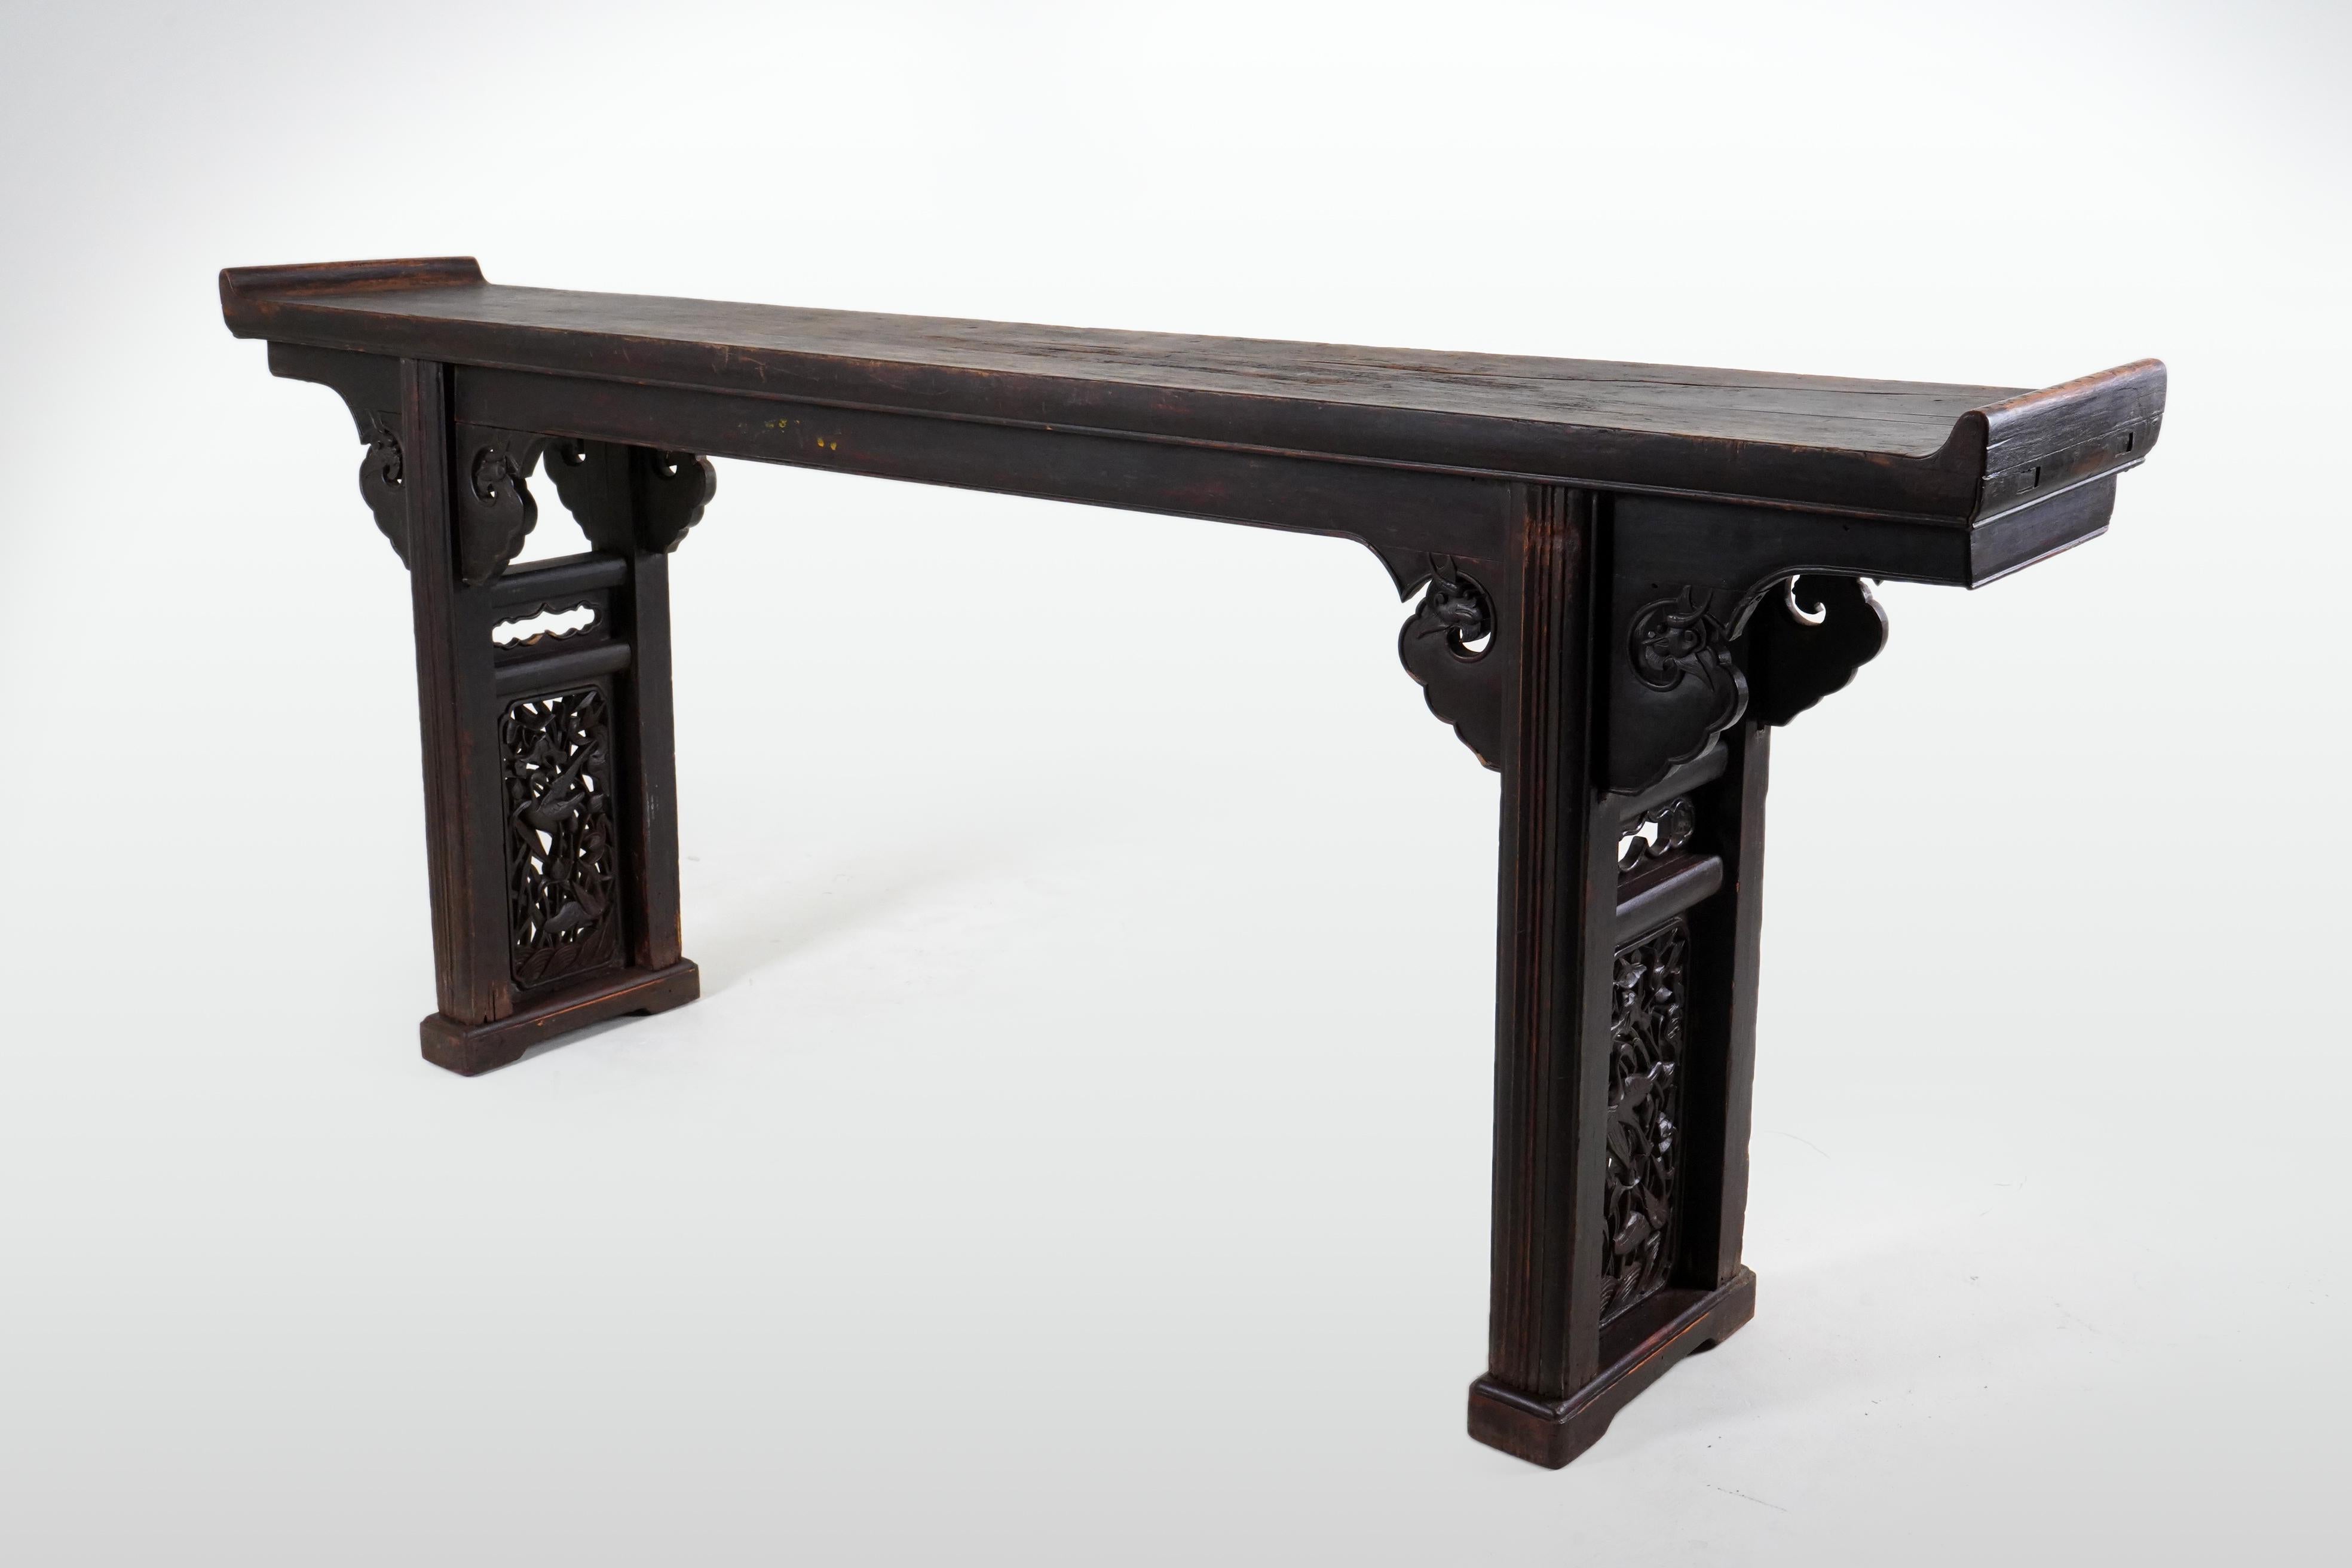 This long and graceful Chinese altar table features an oxblood patina that has darkened with age. Oxblood is one of the three traditional Chinese lacquers, including red and black, both of which are fully opaque. Oxblood is semi-translucent and